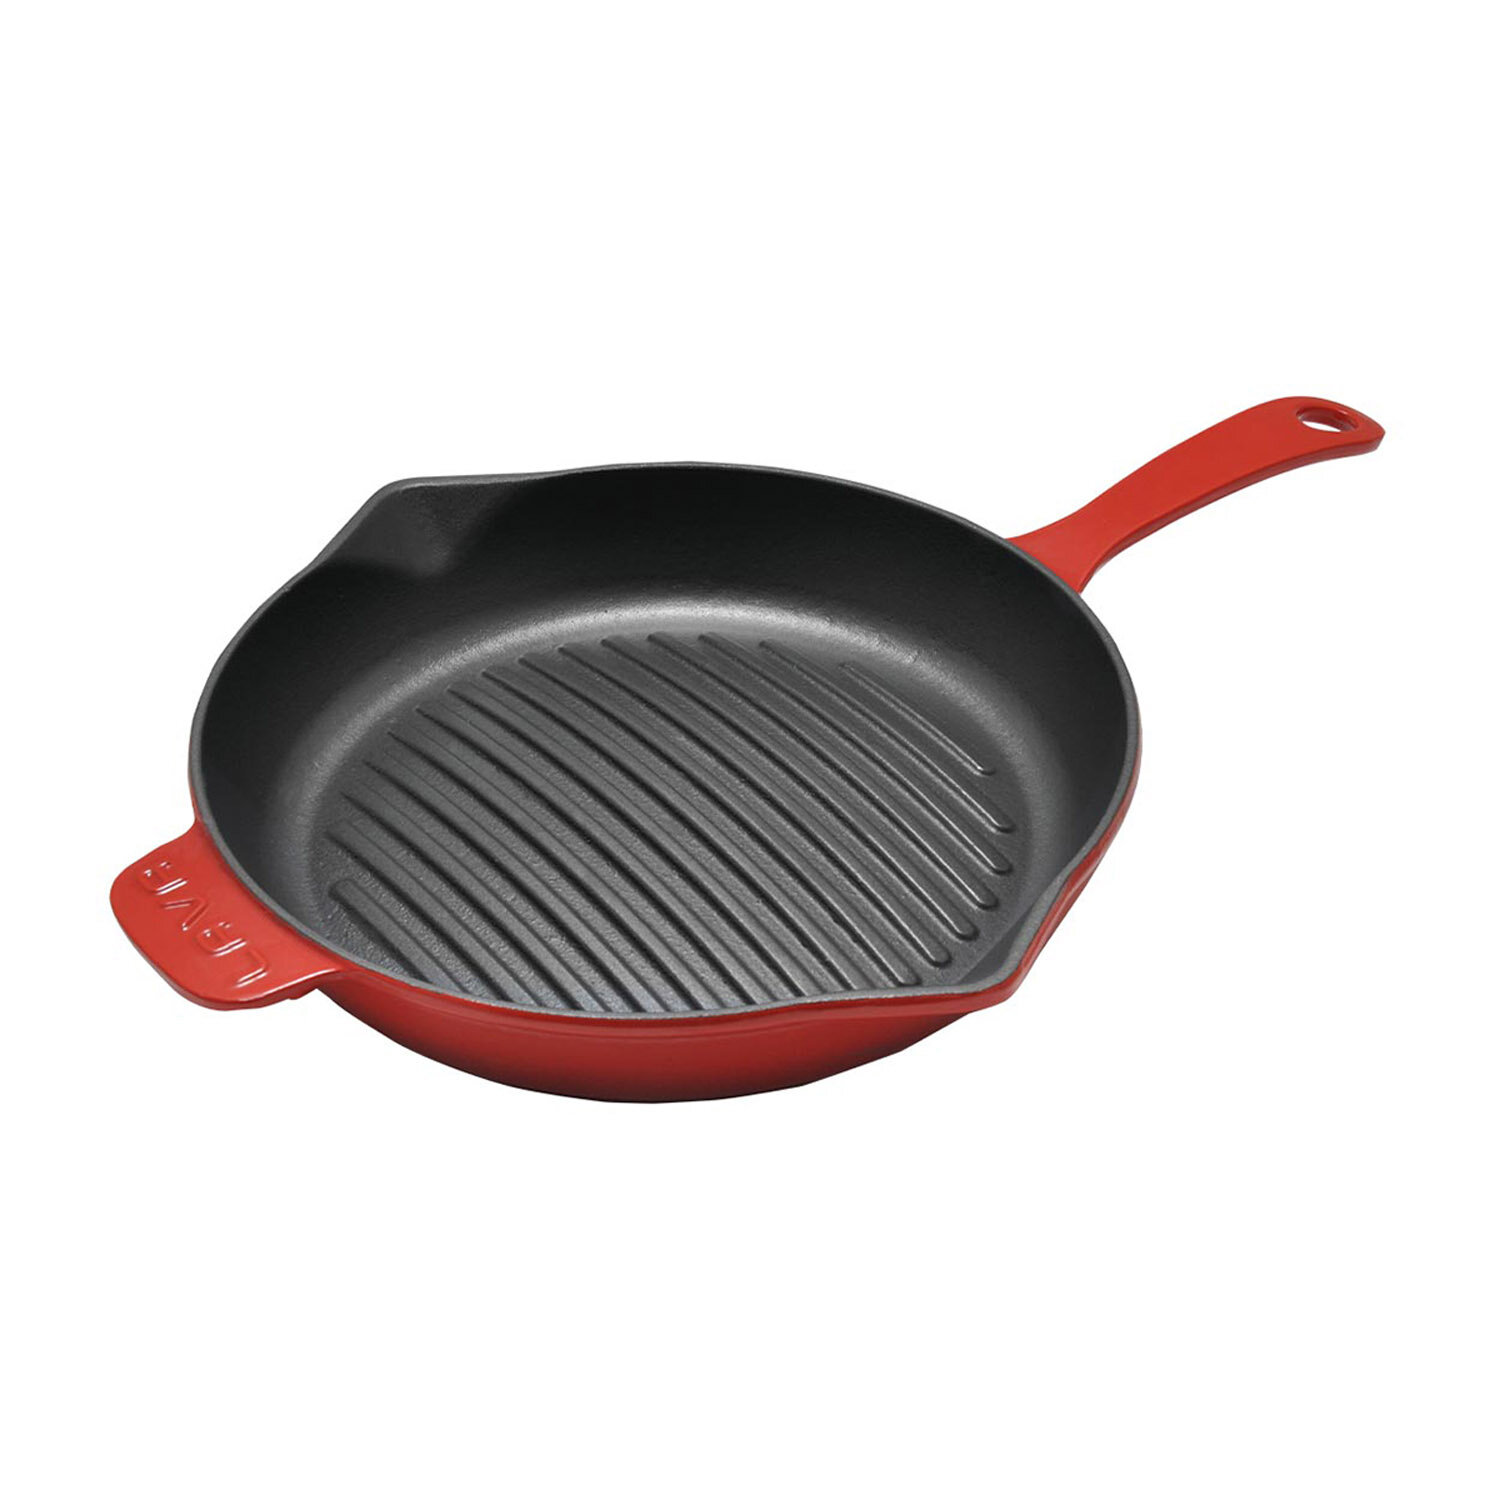 Calphalon cast iron grill pan Red enameled 11 square fry skillet heavy